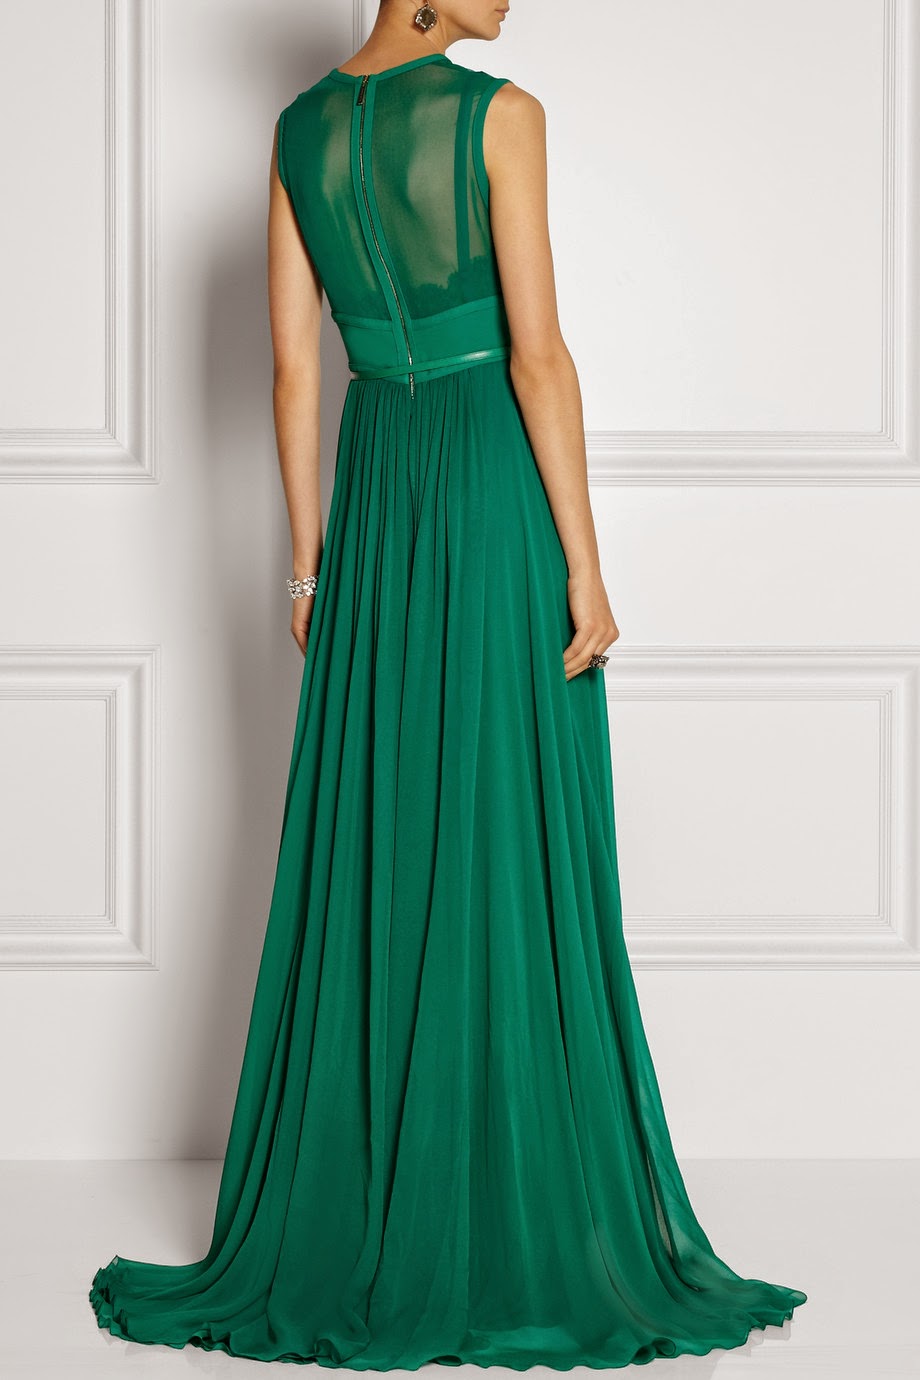 Stretch silk-blend chiffon gown - The Fashion and Beauty Addict